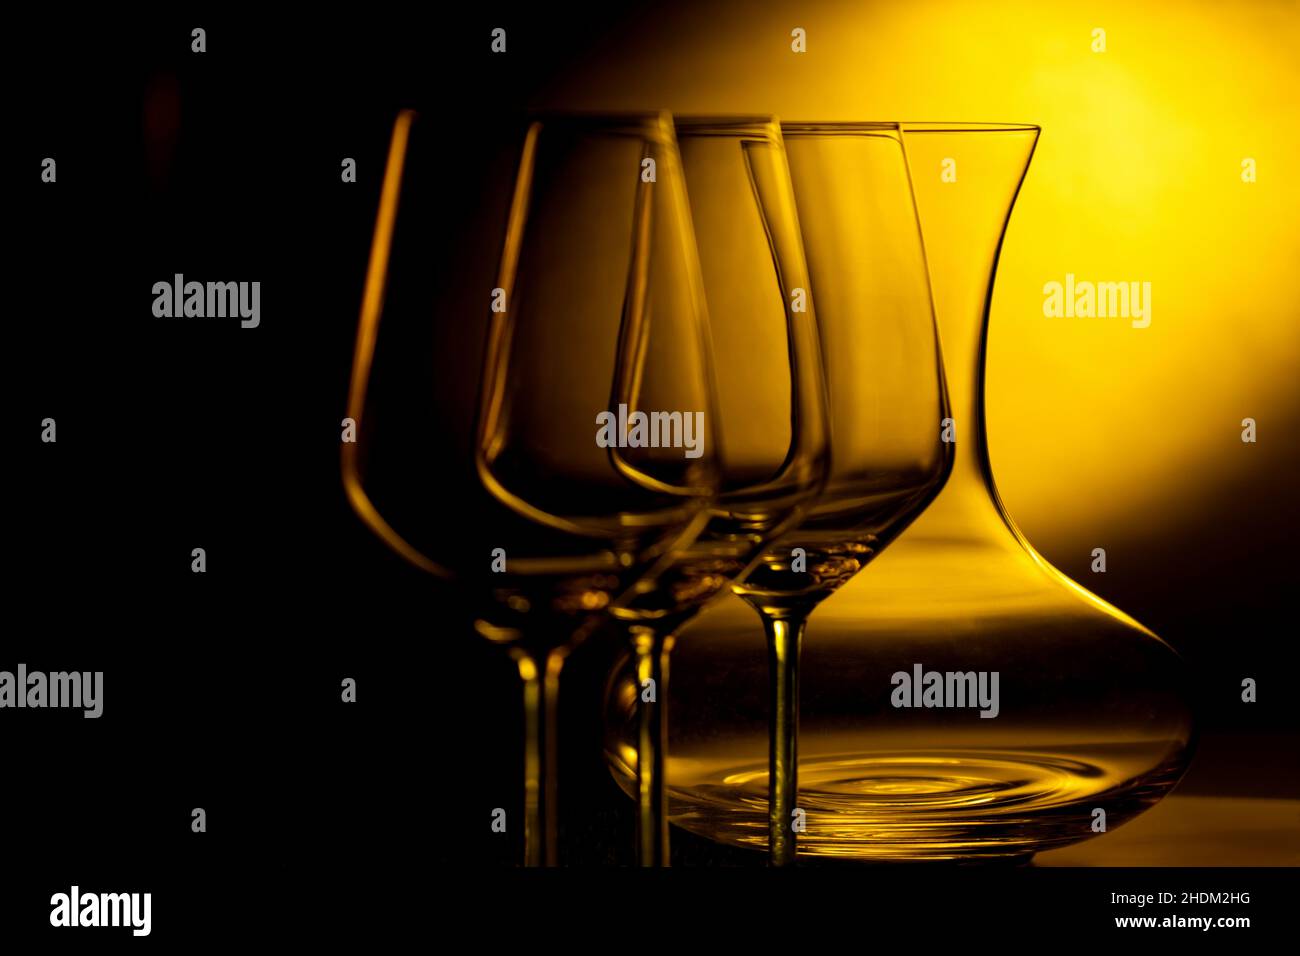 Shot Glass High Resolution Stock Photography and Images - Alamy